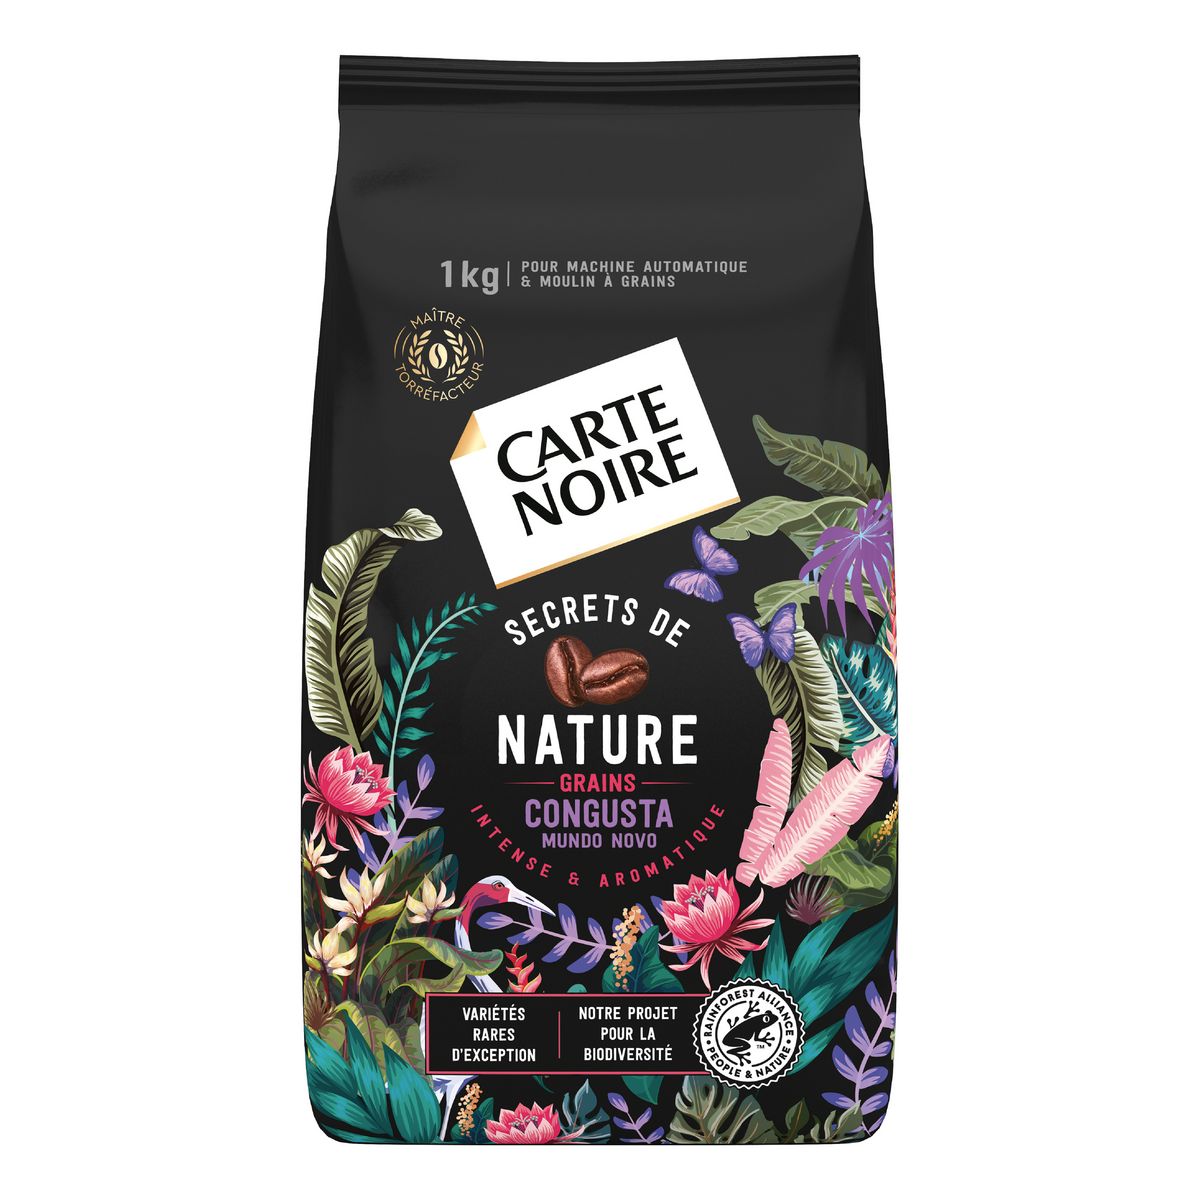 Carte Noire - Whole beans coffee from France 2pack 2x8.8oz